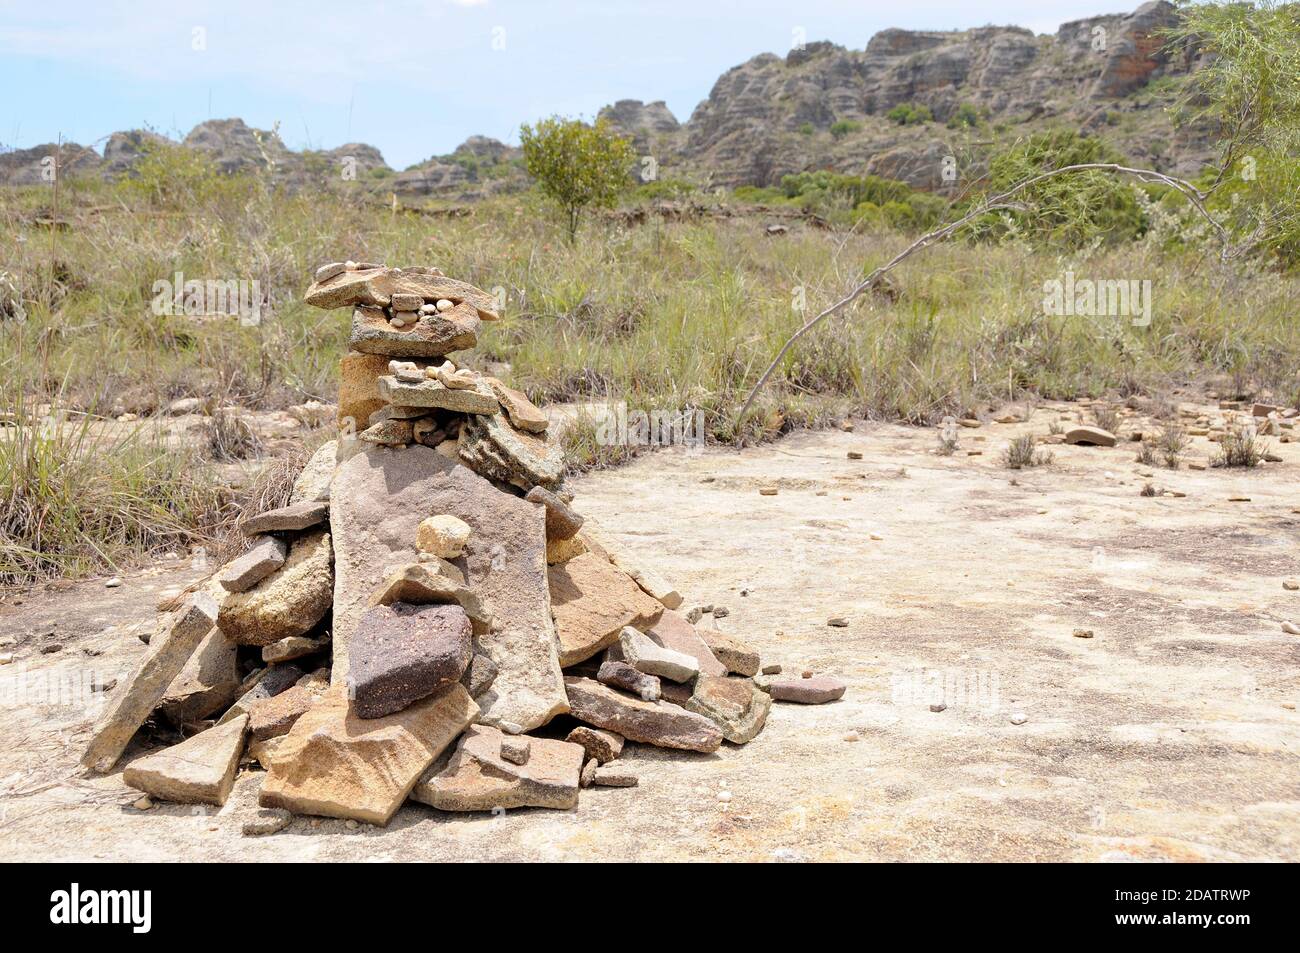 cairn of rocks in Isalo National Park, Madagascar Stock Photo